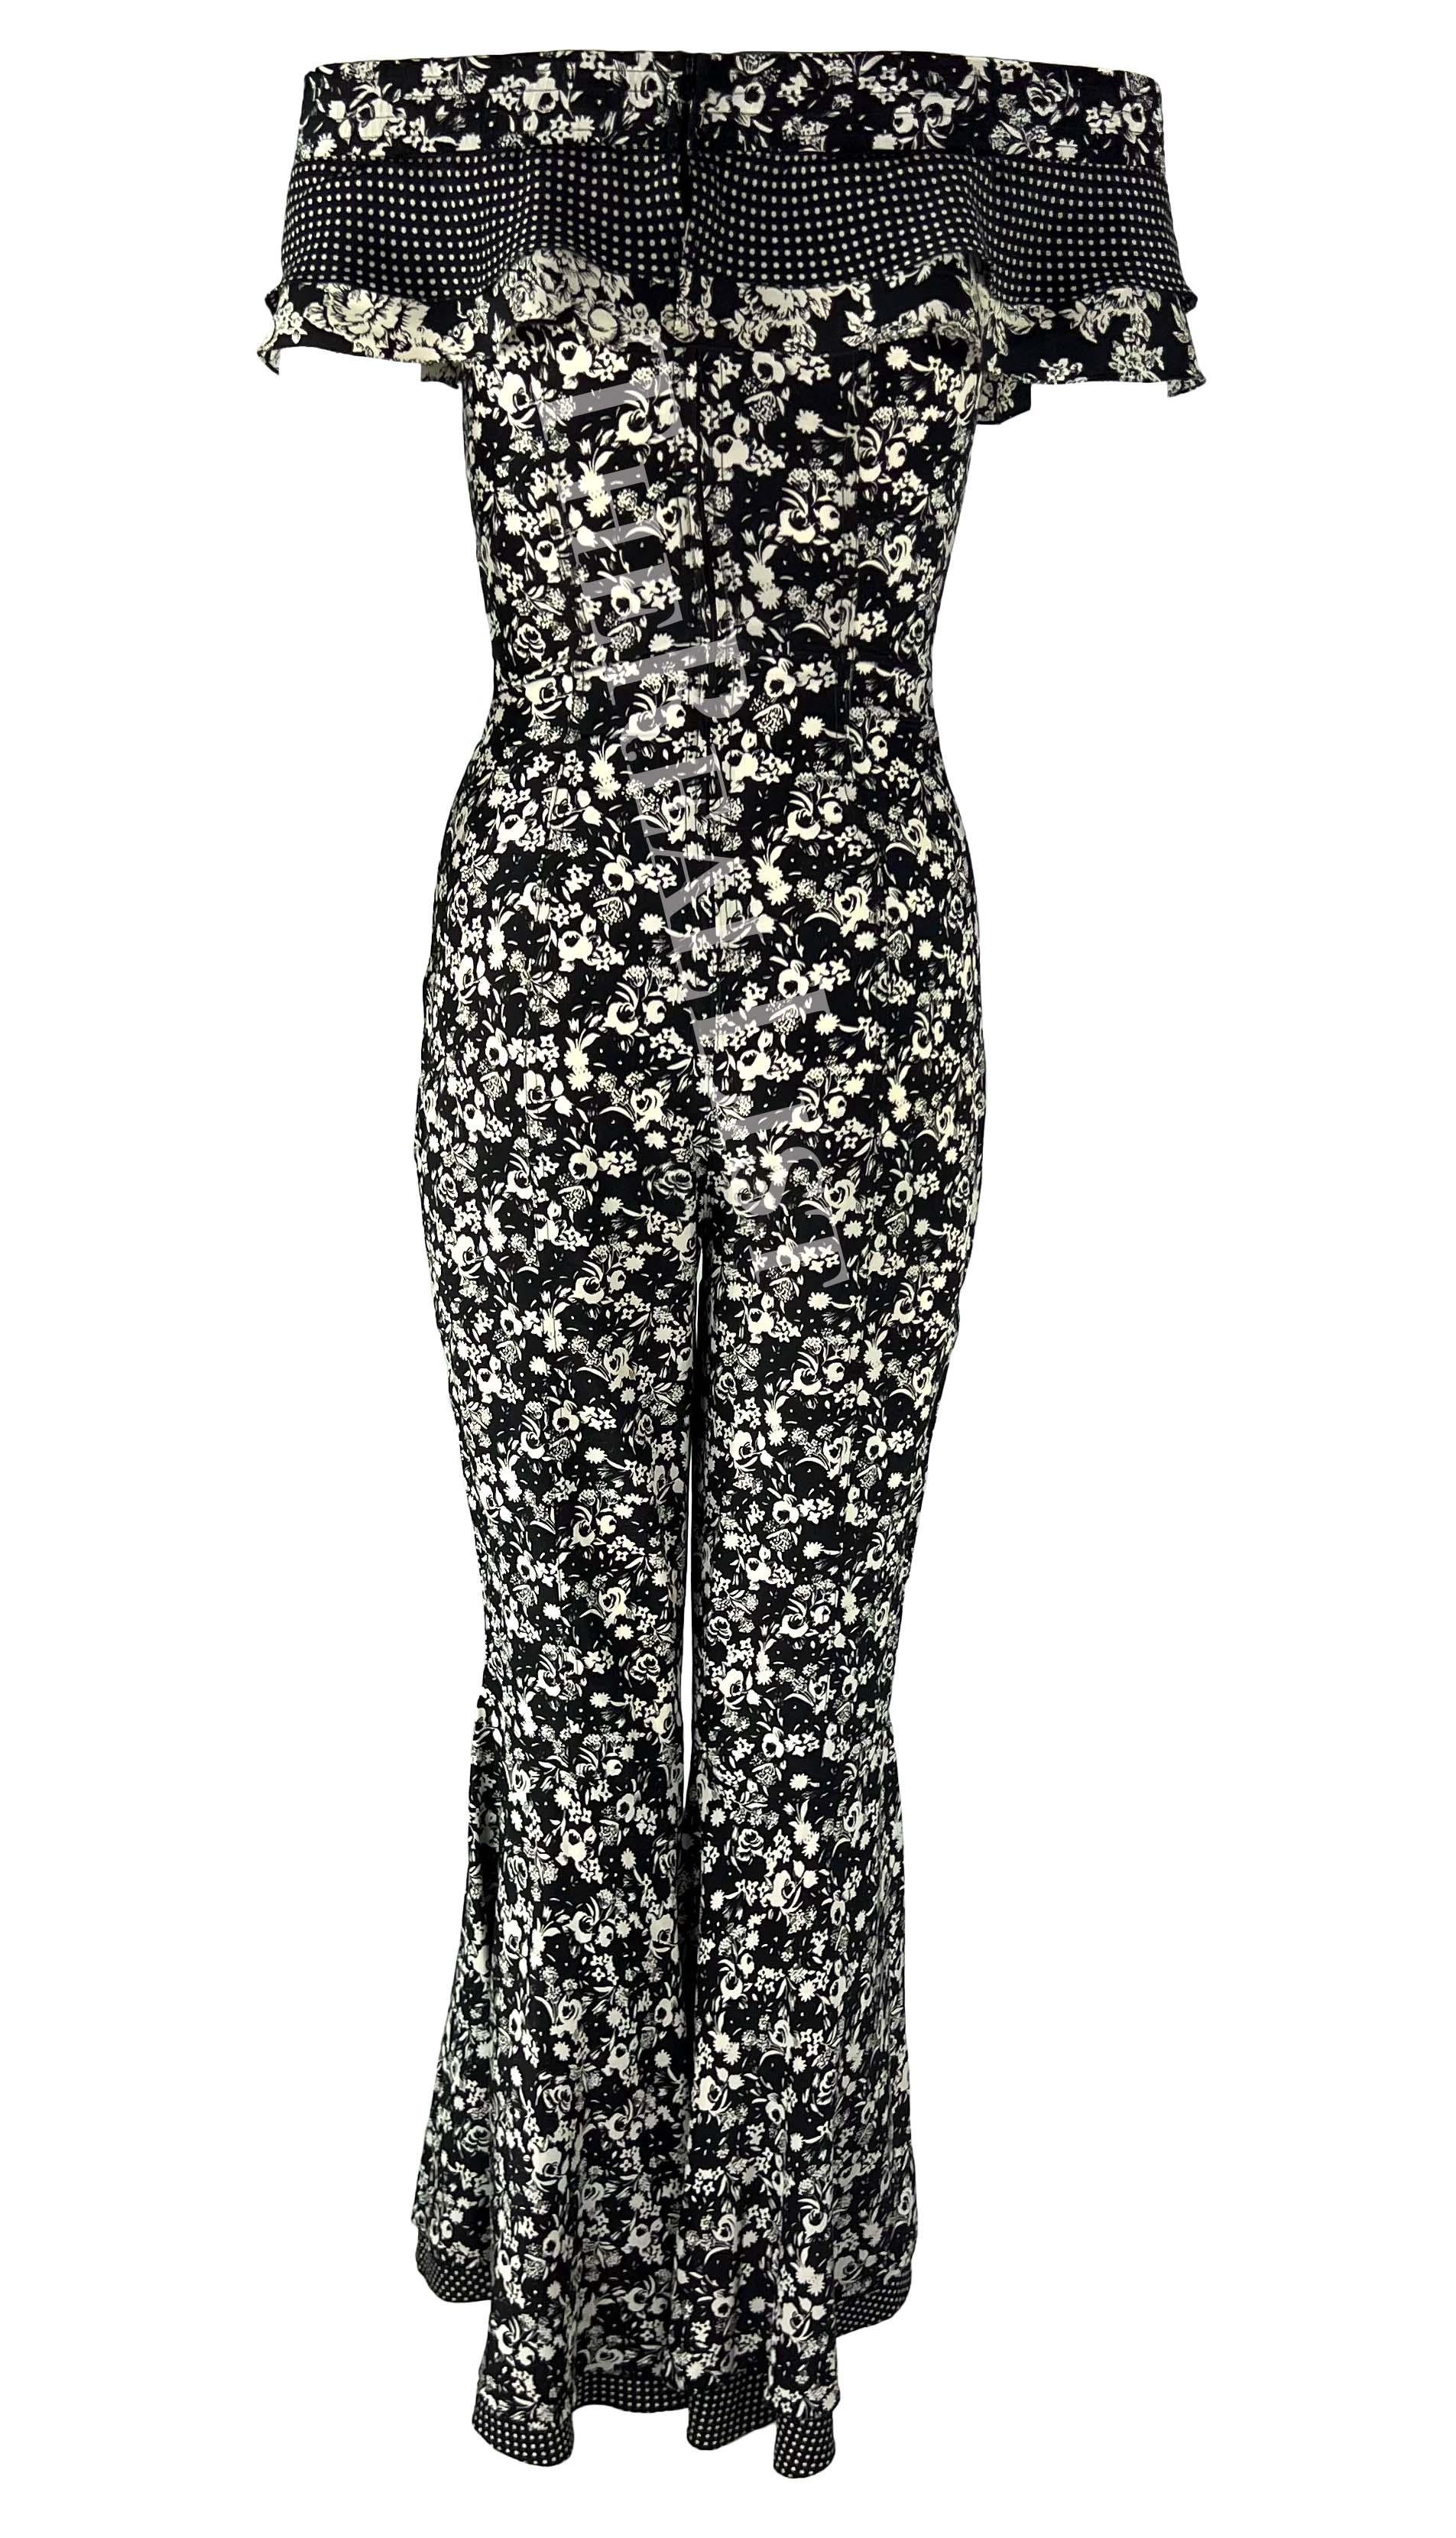 S/S 1993 Gianni Versace Black White Floral Flared Bell-Bottom Catsuit For Sale 1